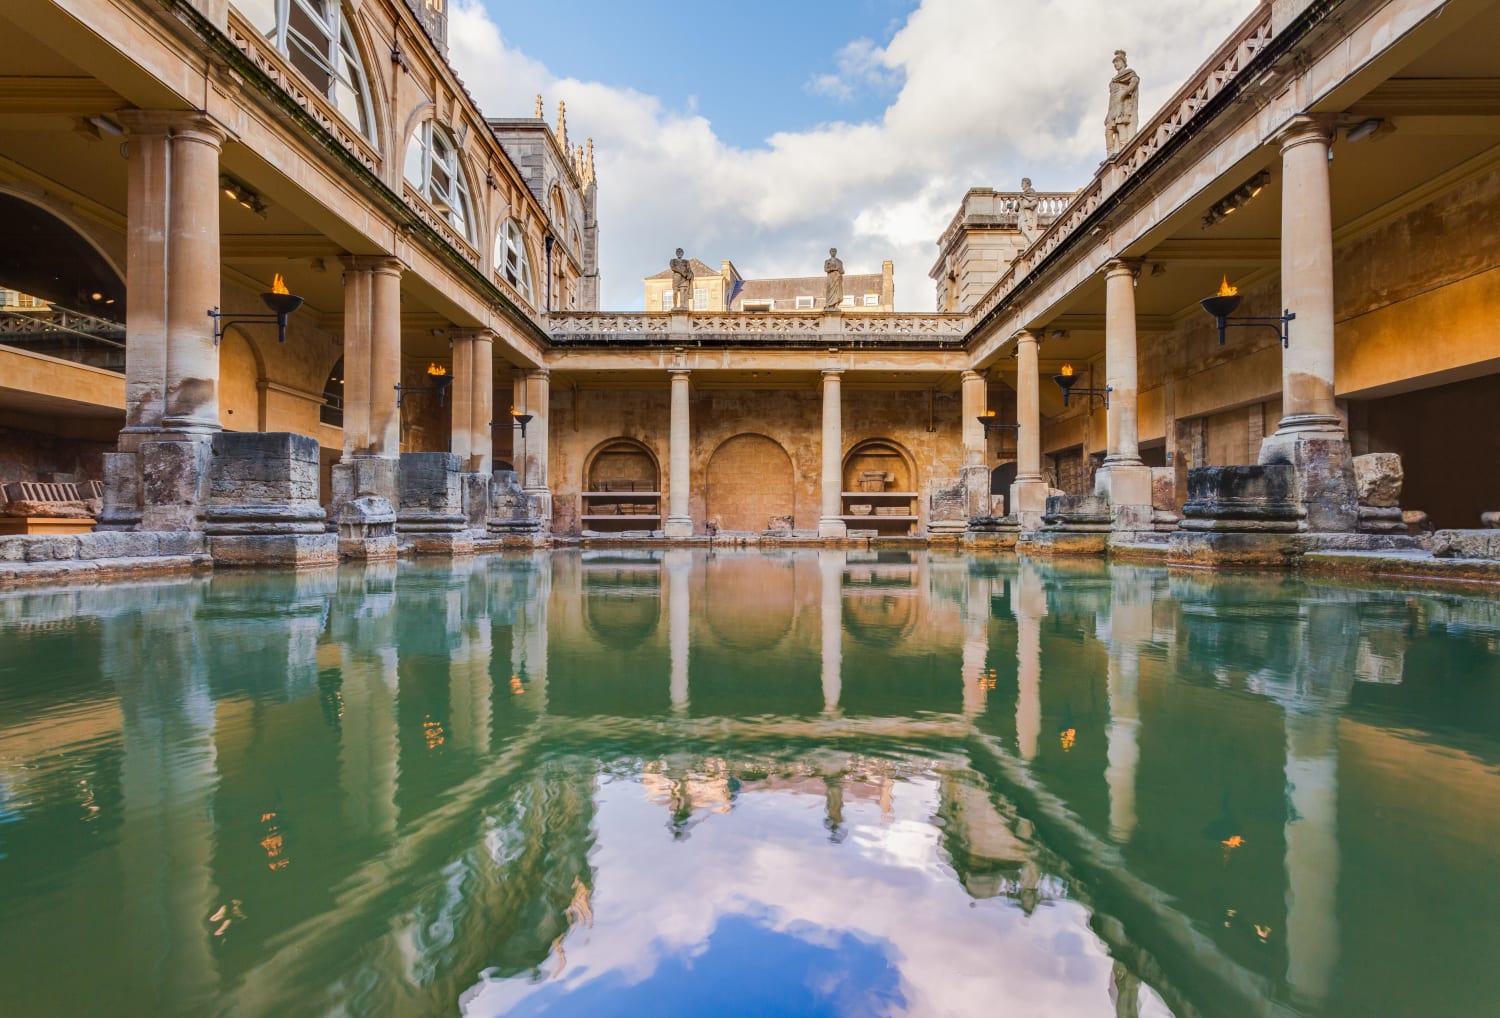 "View of the Great Bath, part of the Roman Baths complex, a site of historical interest in the city of Bath, England" / Date: 12 August 2014 / Resolution: / Author: Diego Delso, {http://delso.photo}, License CC-BY-SA